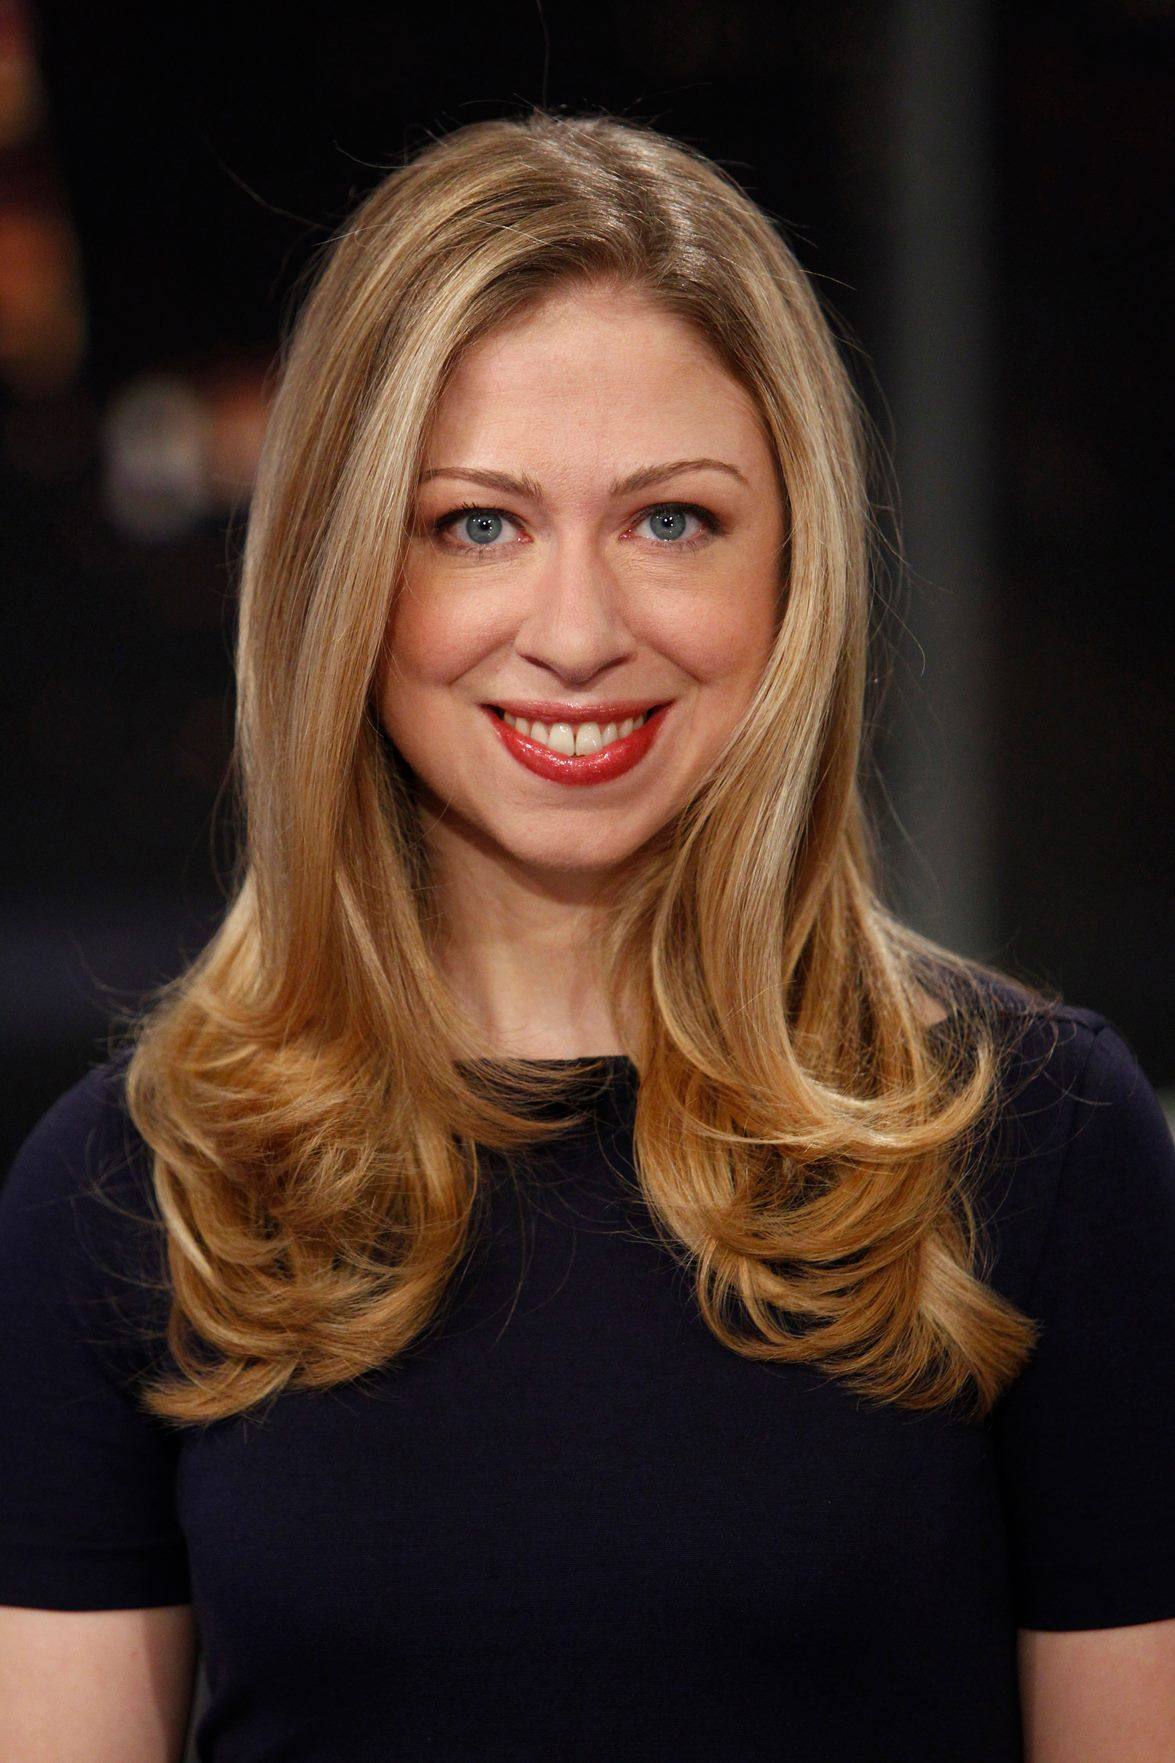 Chelsea Clinton has been a busy mother of three and has also invested in a tele medicine company. Photo: Chelsea Clinton/Facebook